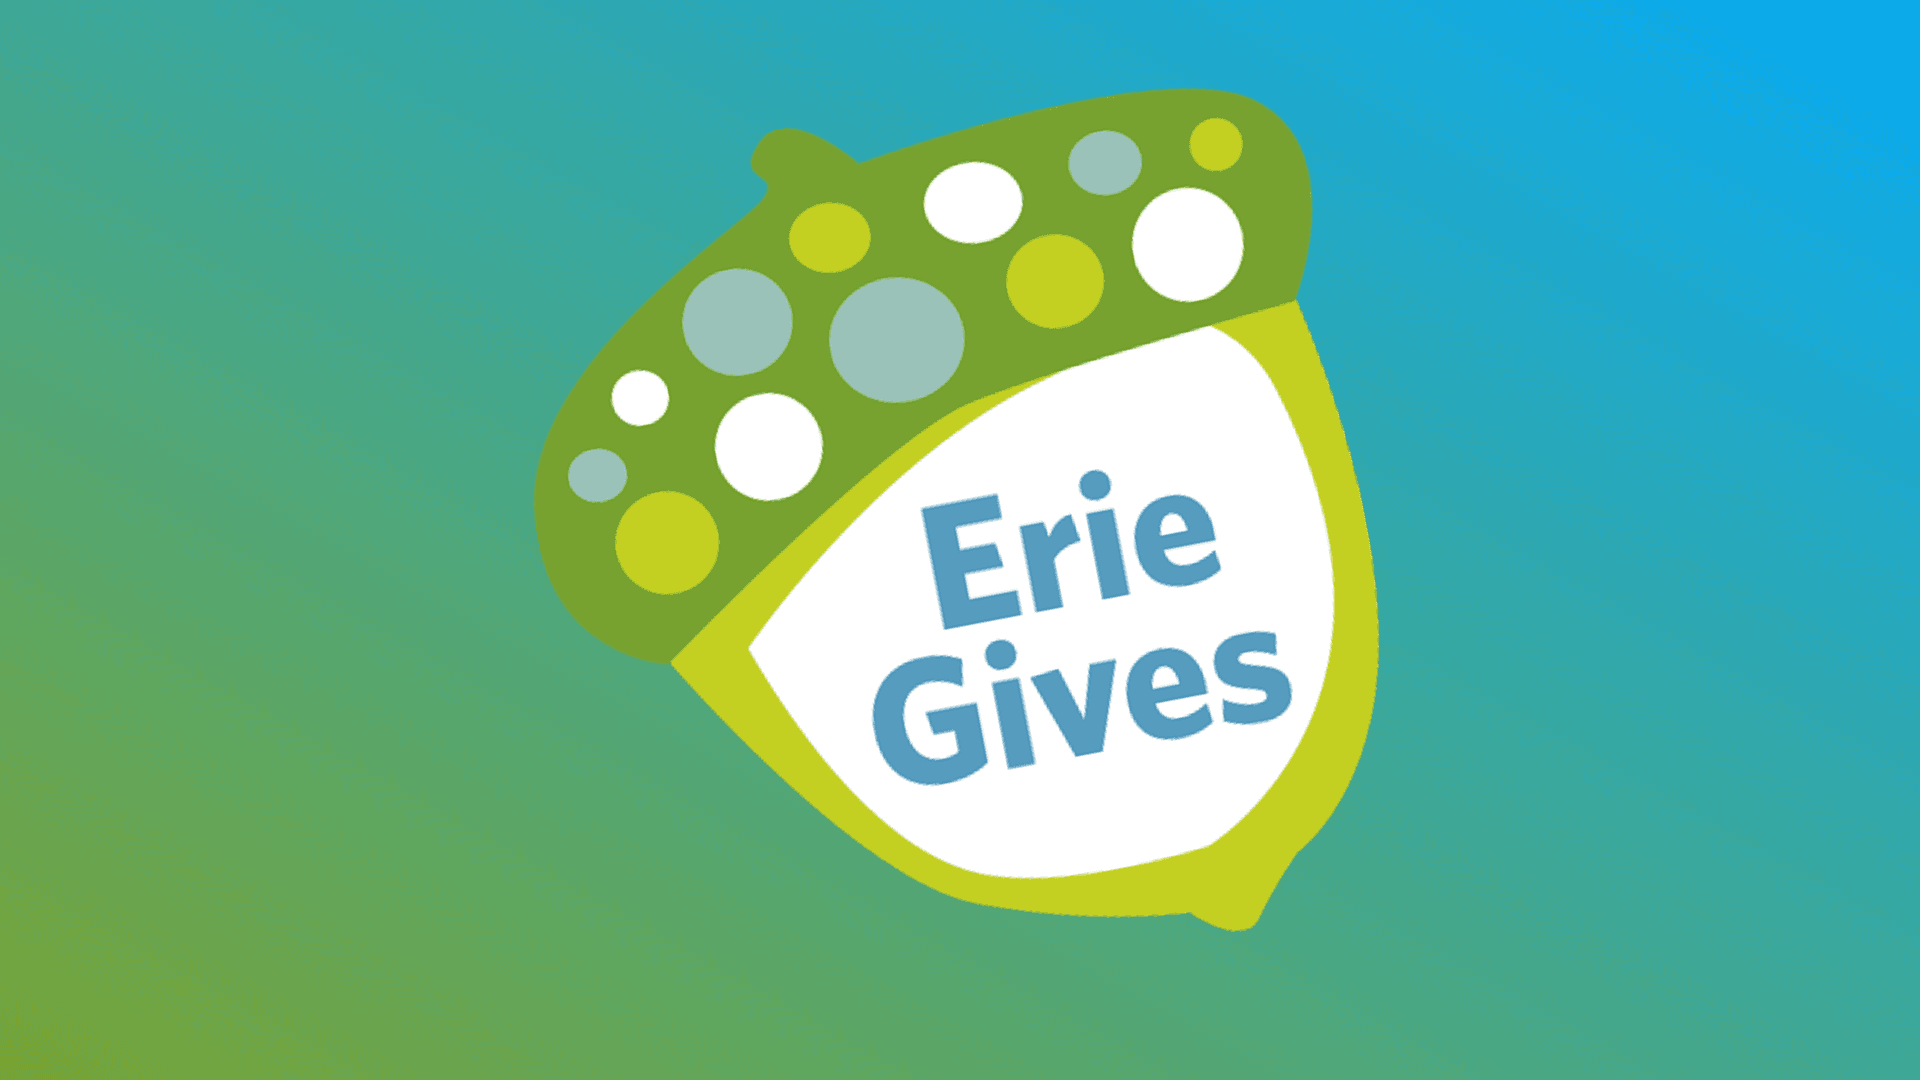 Is Your Erie Gives Profile Ready for Action?